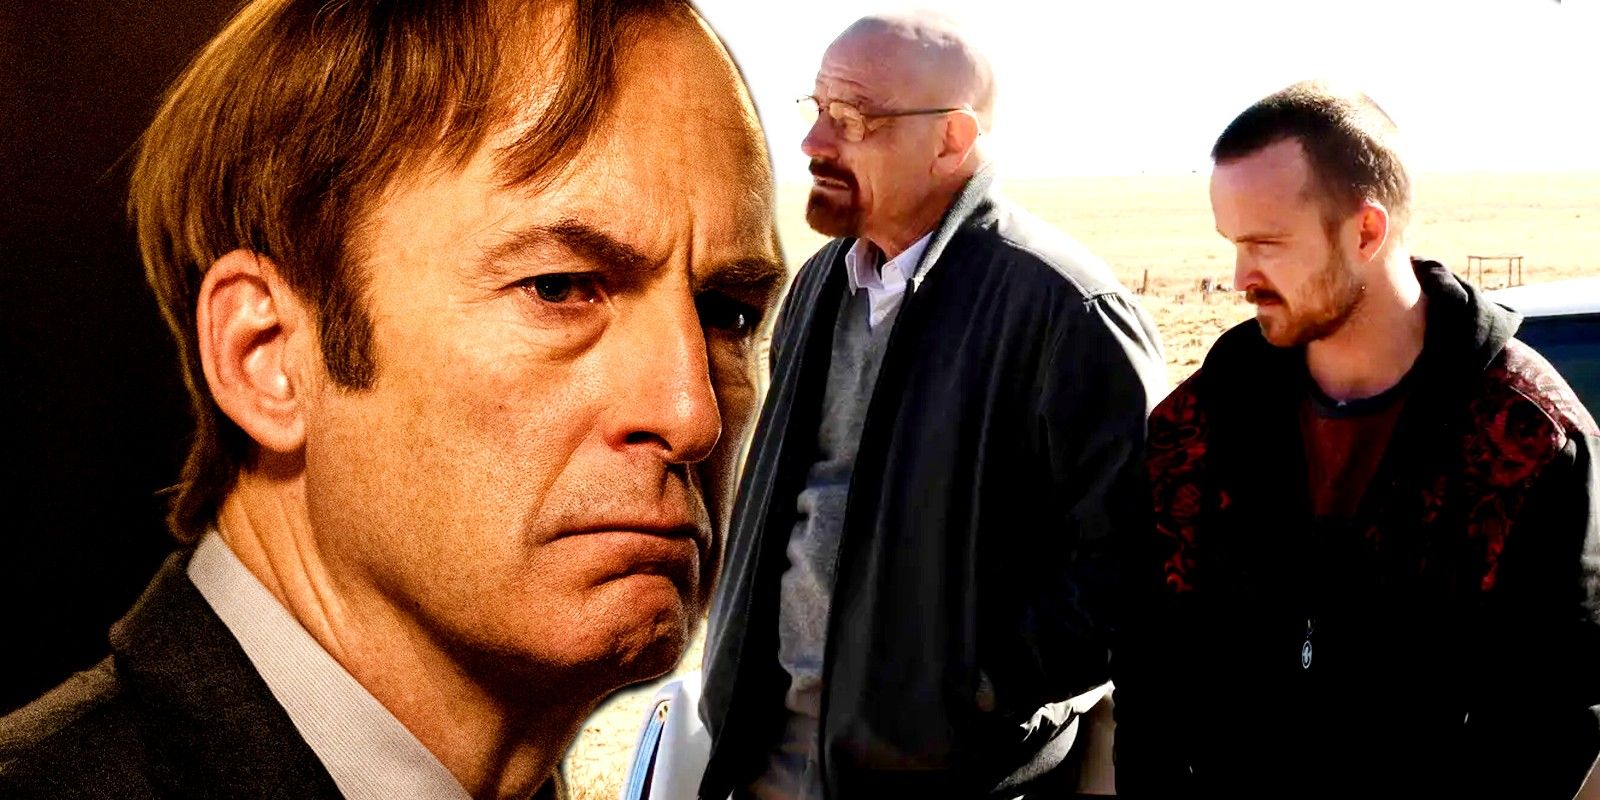 Blended image of Saul Goodman and Walter White and Jesse Pinkman waiting at the car in Breaking Bad